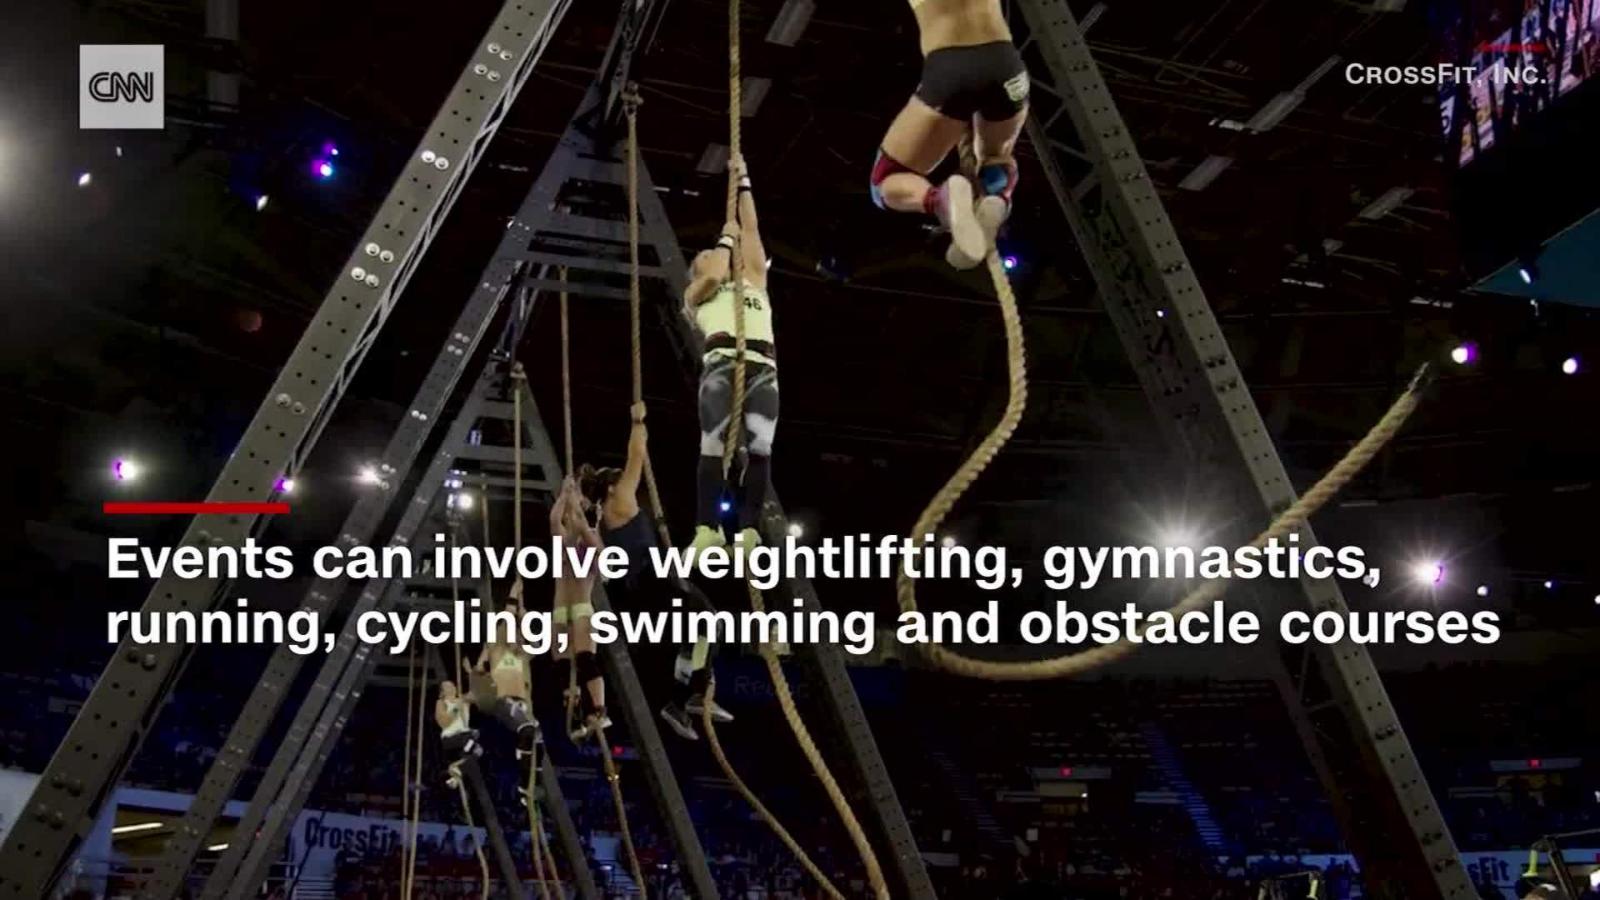 Can Crossfit Star Regain 'fittest Woman On Earth' Title - Acrobatics , HD Wallpaper & Backgrounds